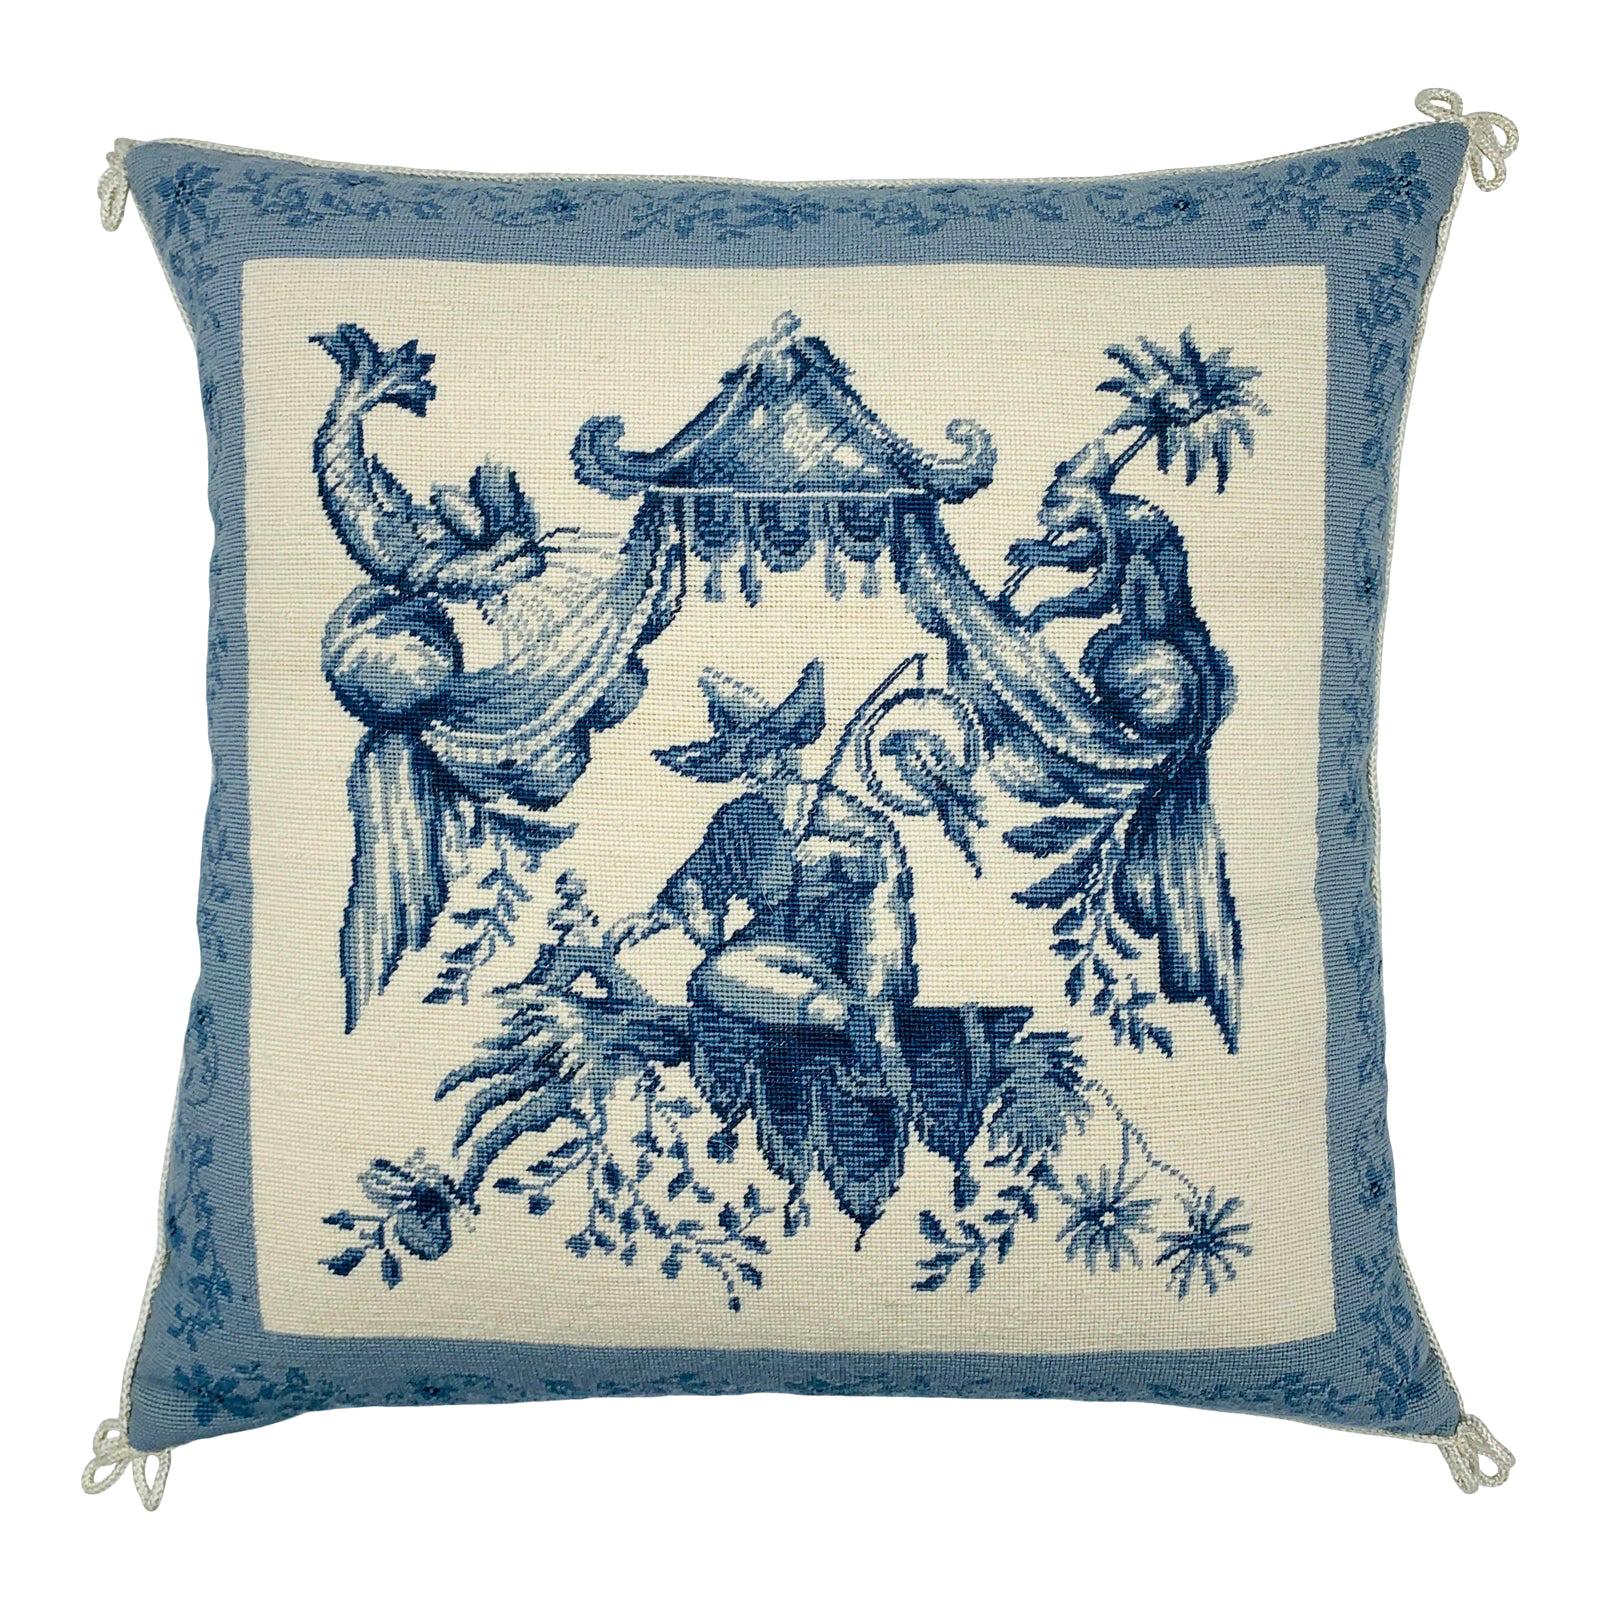 Chinoiserie Blue and White Pagoda Needlepoint Pillow, 1970s For Sale